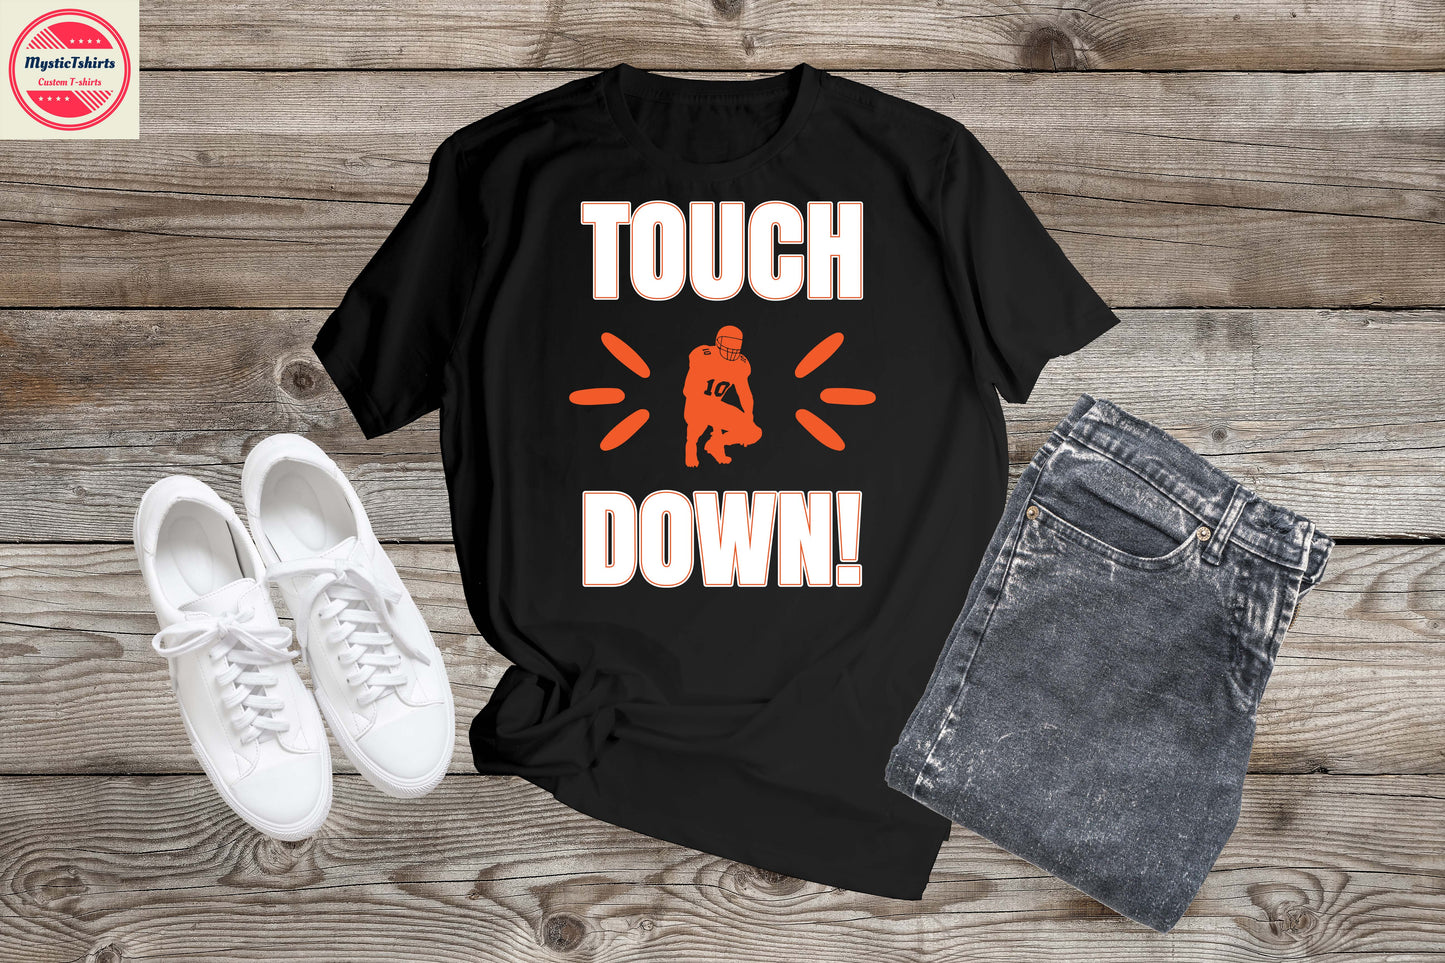 464. TOUCH DOWN, Custom Made Shirt, Personalized T-Shirt, Custom Text, Make Your Own Shirt, Custom Tee